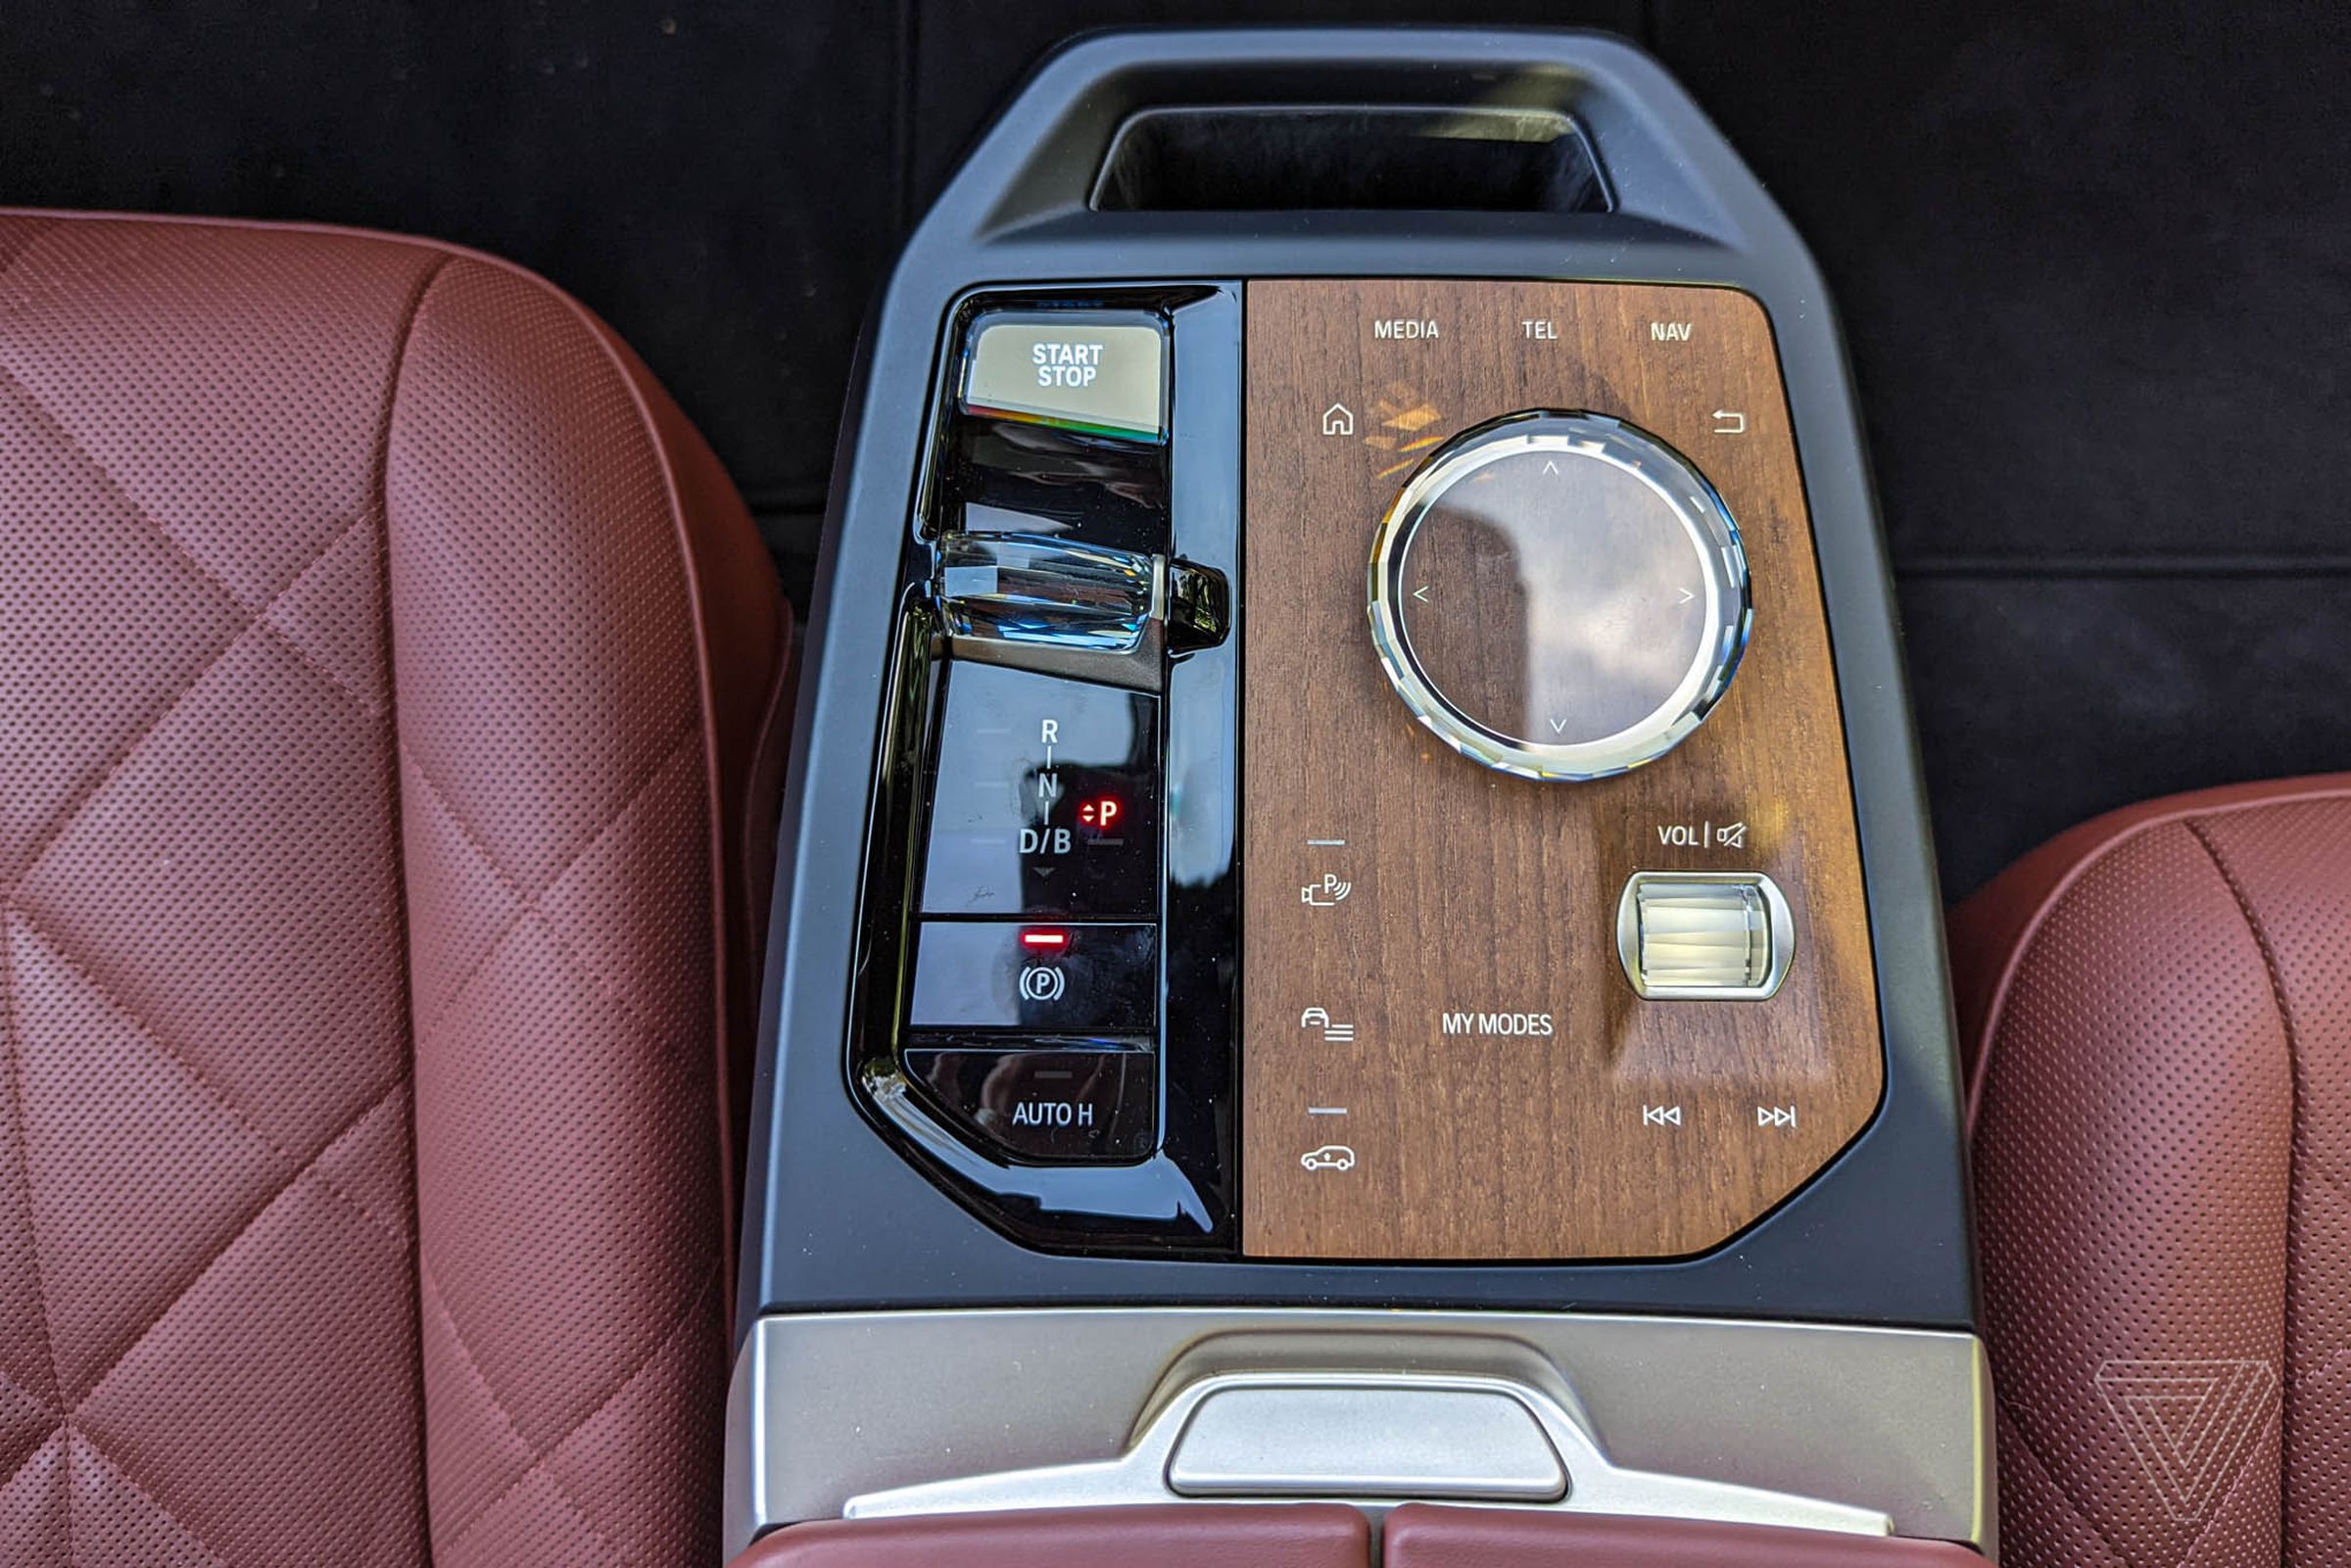 The iX is opulent and luxurious, complete with crystal knobs and buttons.